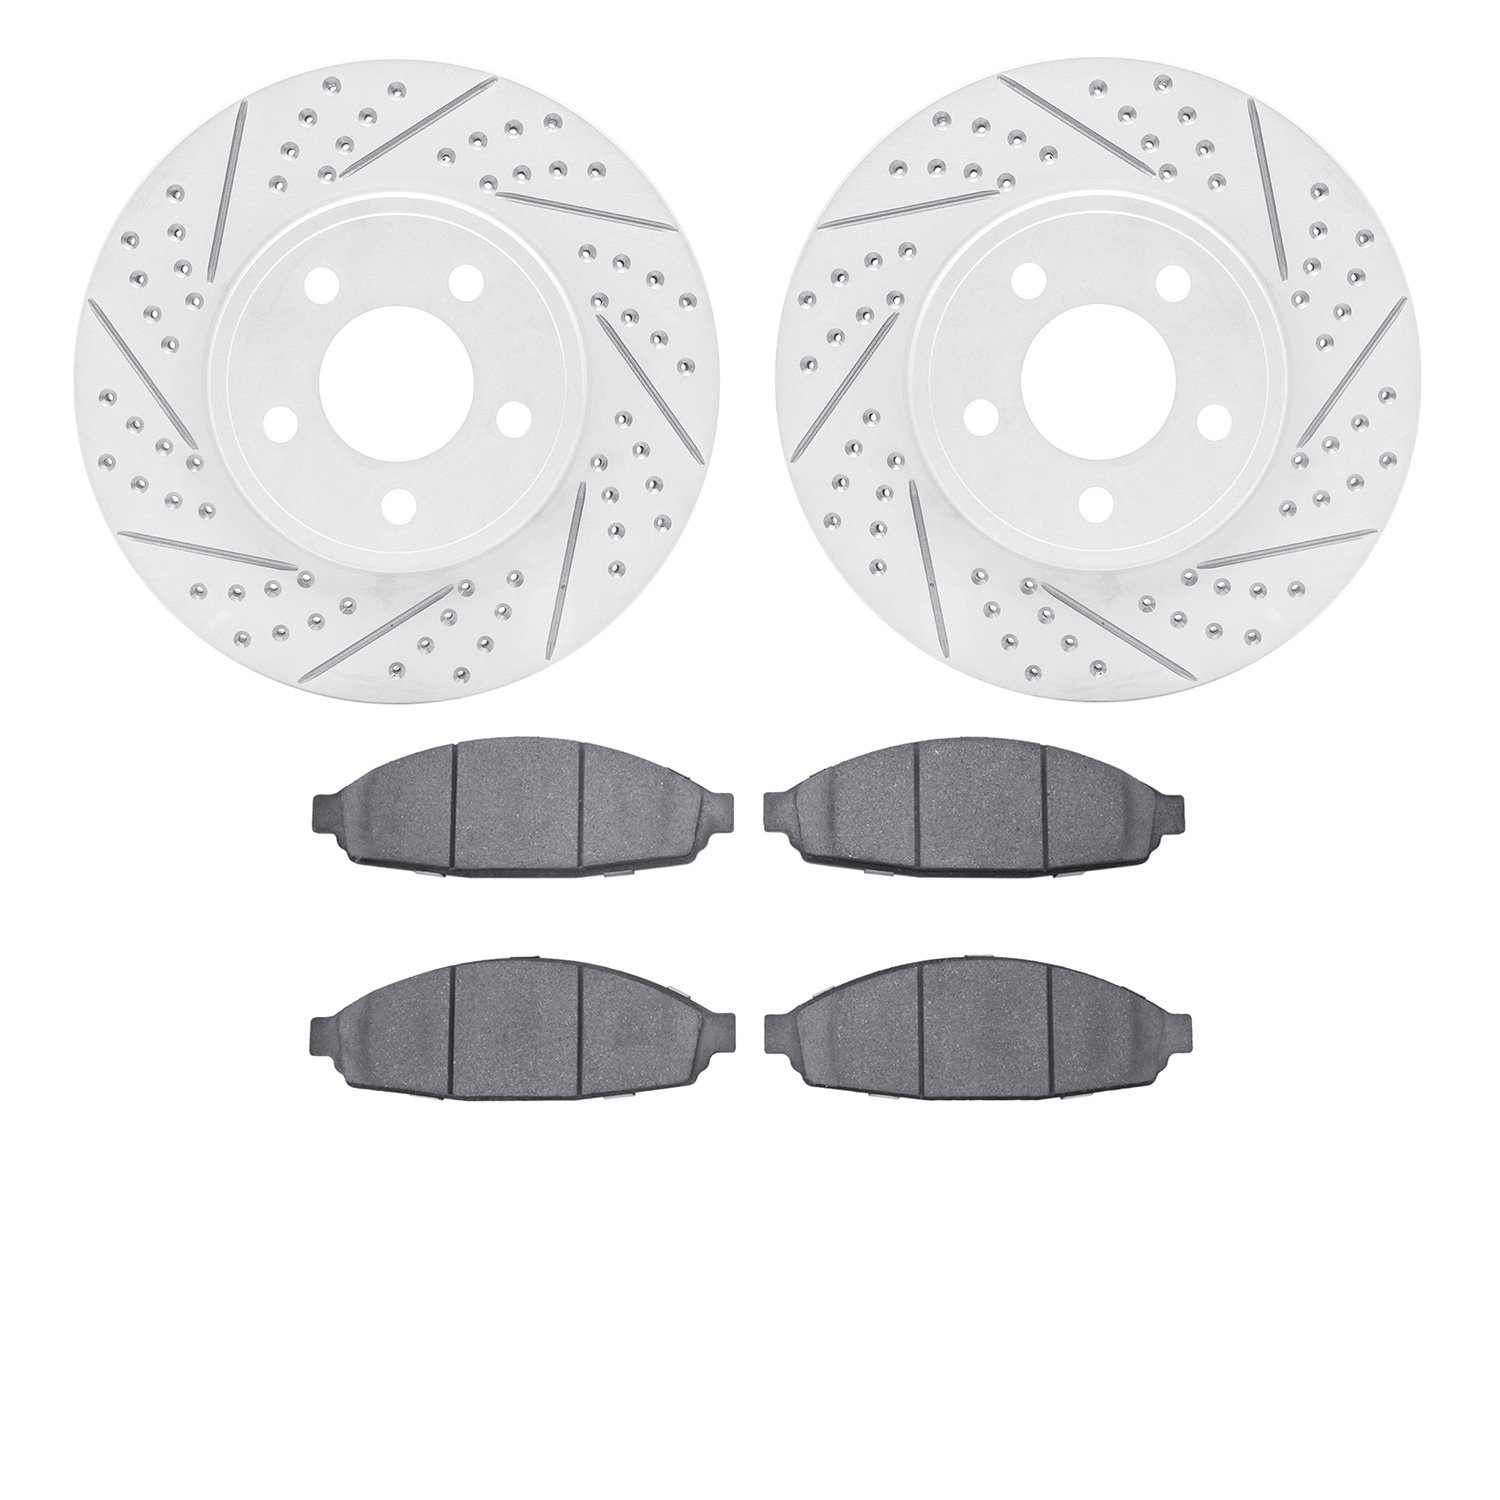 2502-56007 Geoperformance Drilled/Slotted Rotors w/5000 Advanced Brake Pads Kit, 2003-2011 Ford/Lincoln/Mercury/Mazda, Position: